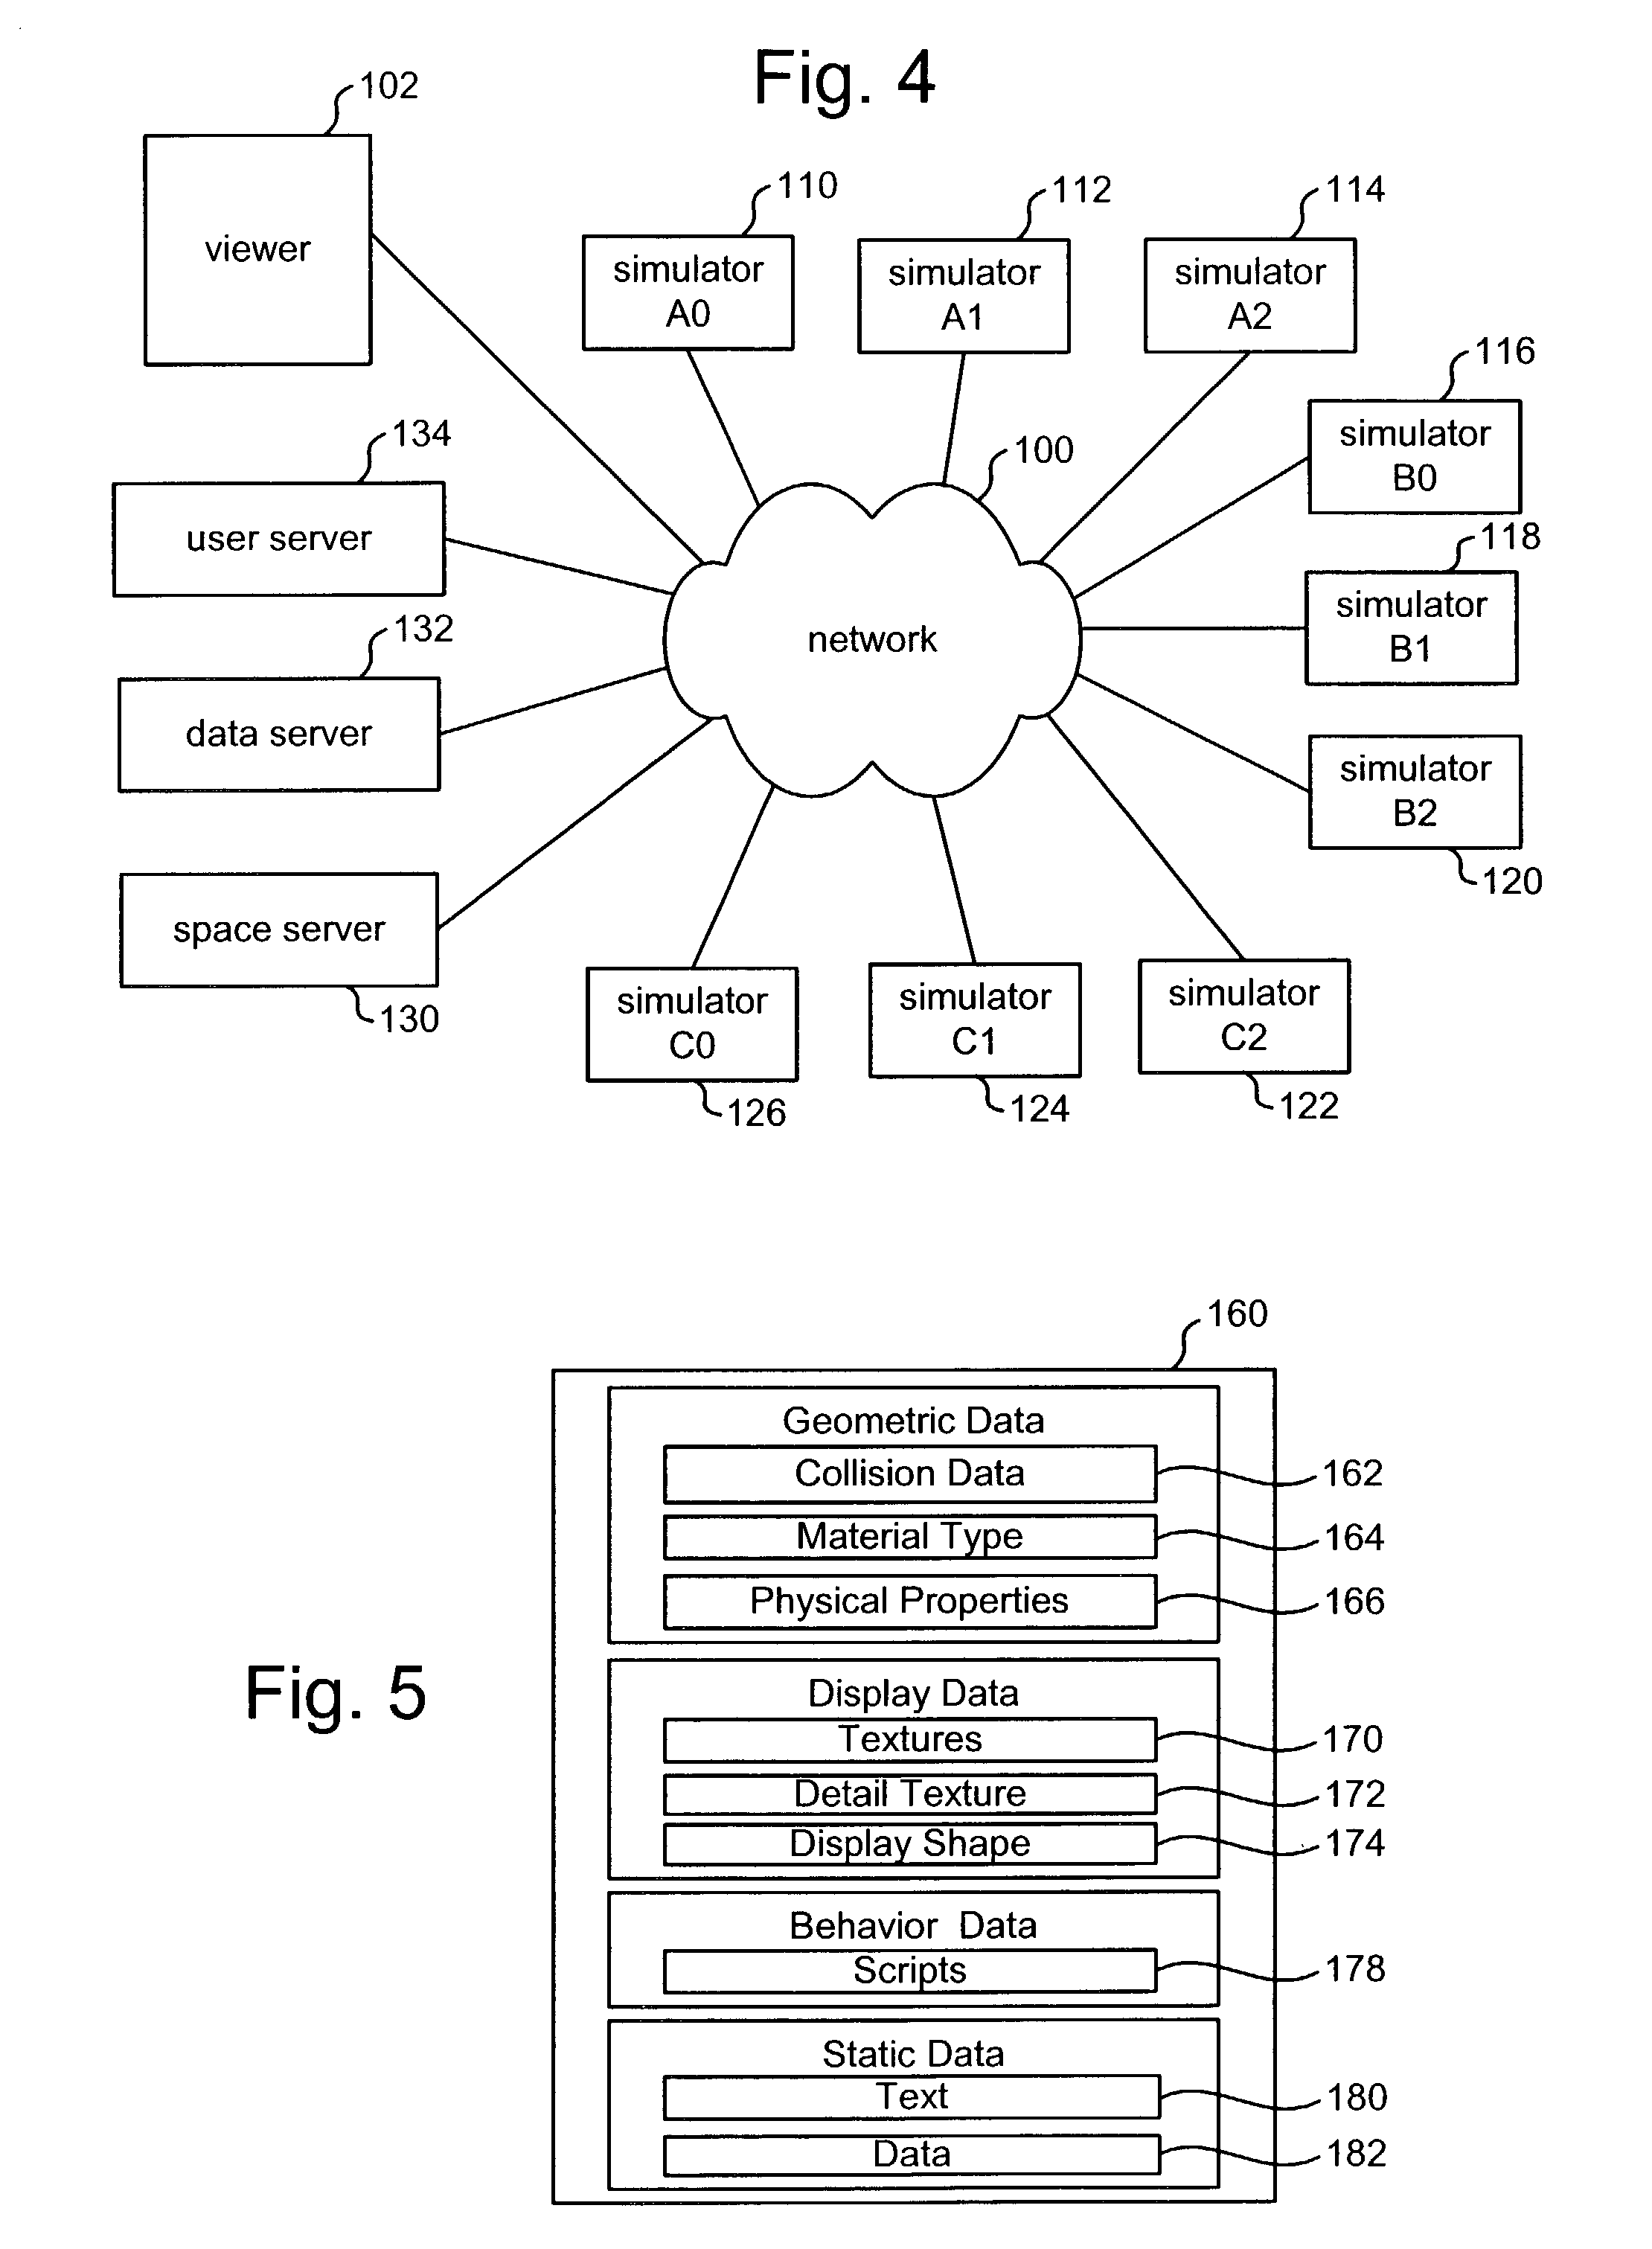 System and method for distributed simulation in which different simulation servers simulate different regions of a simulation space